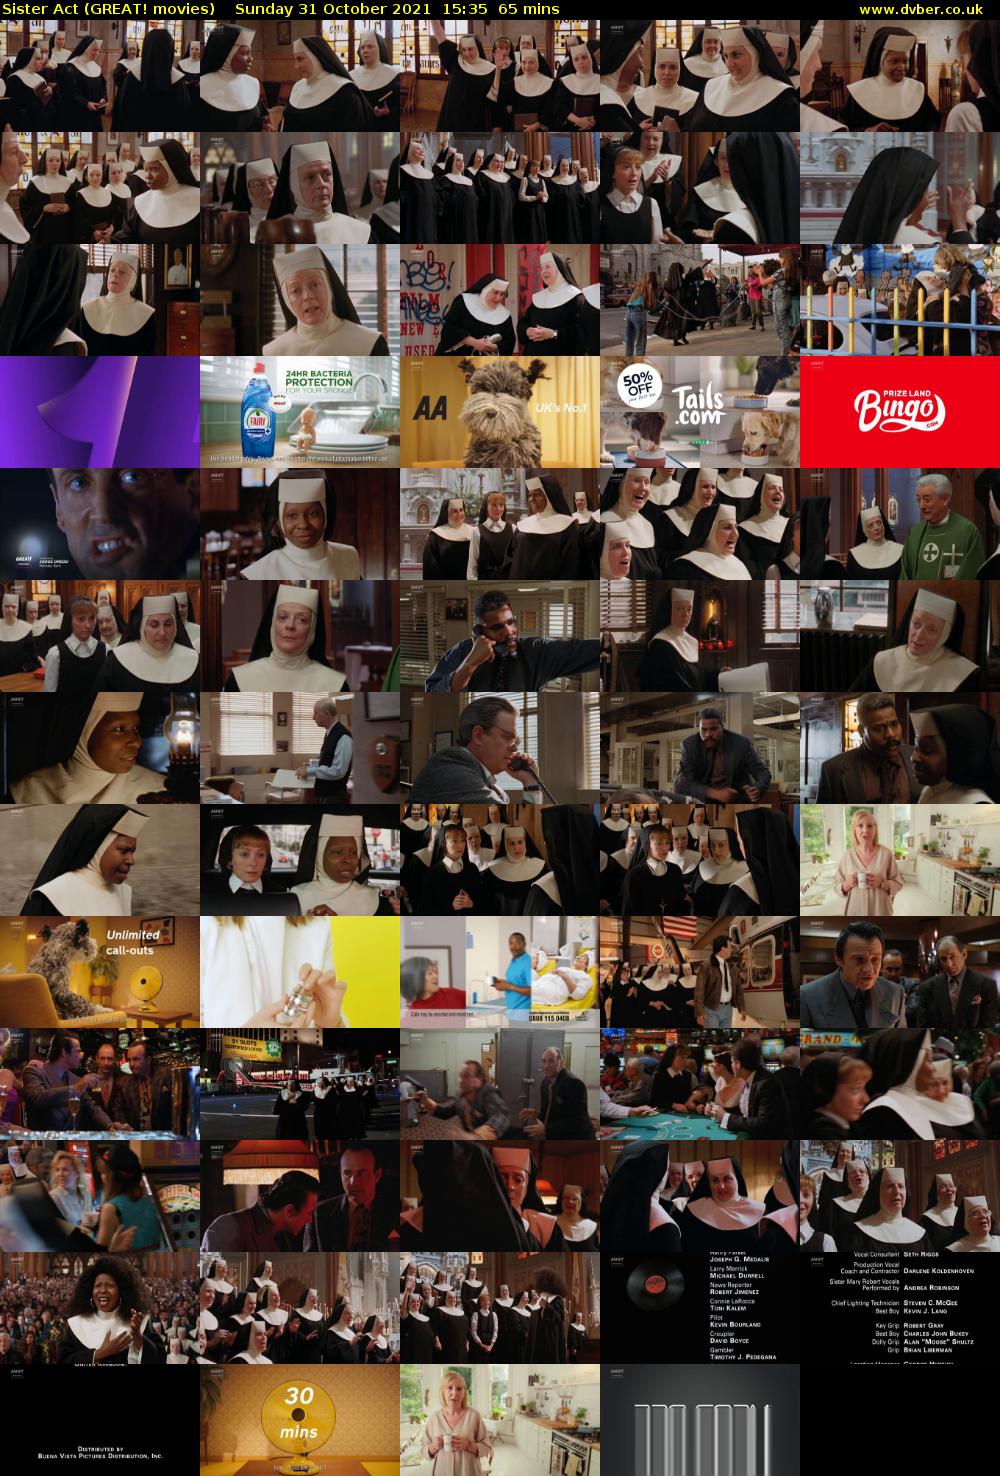 Sister Act (GREAT! movies) Sunday 31 October 2021 15:35 - 16:40